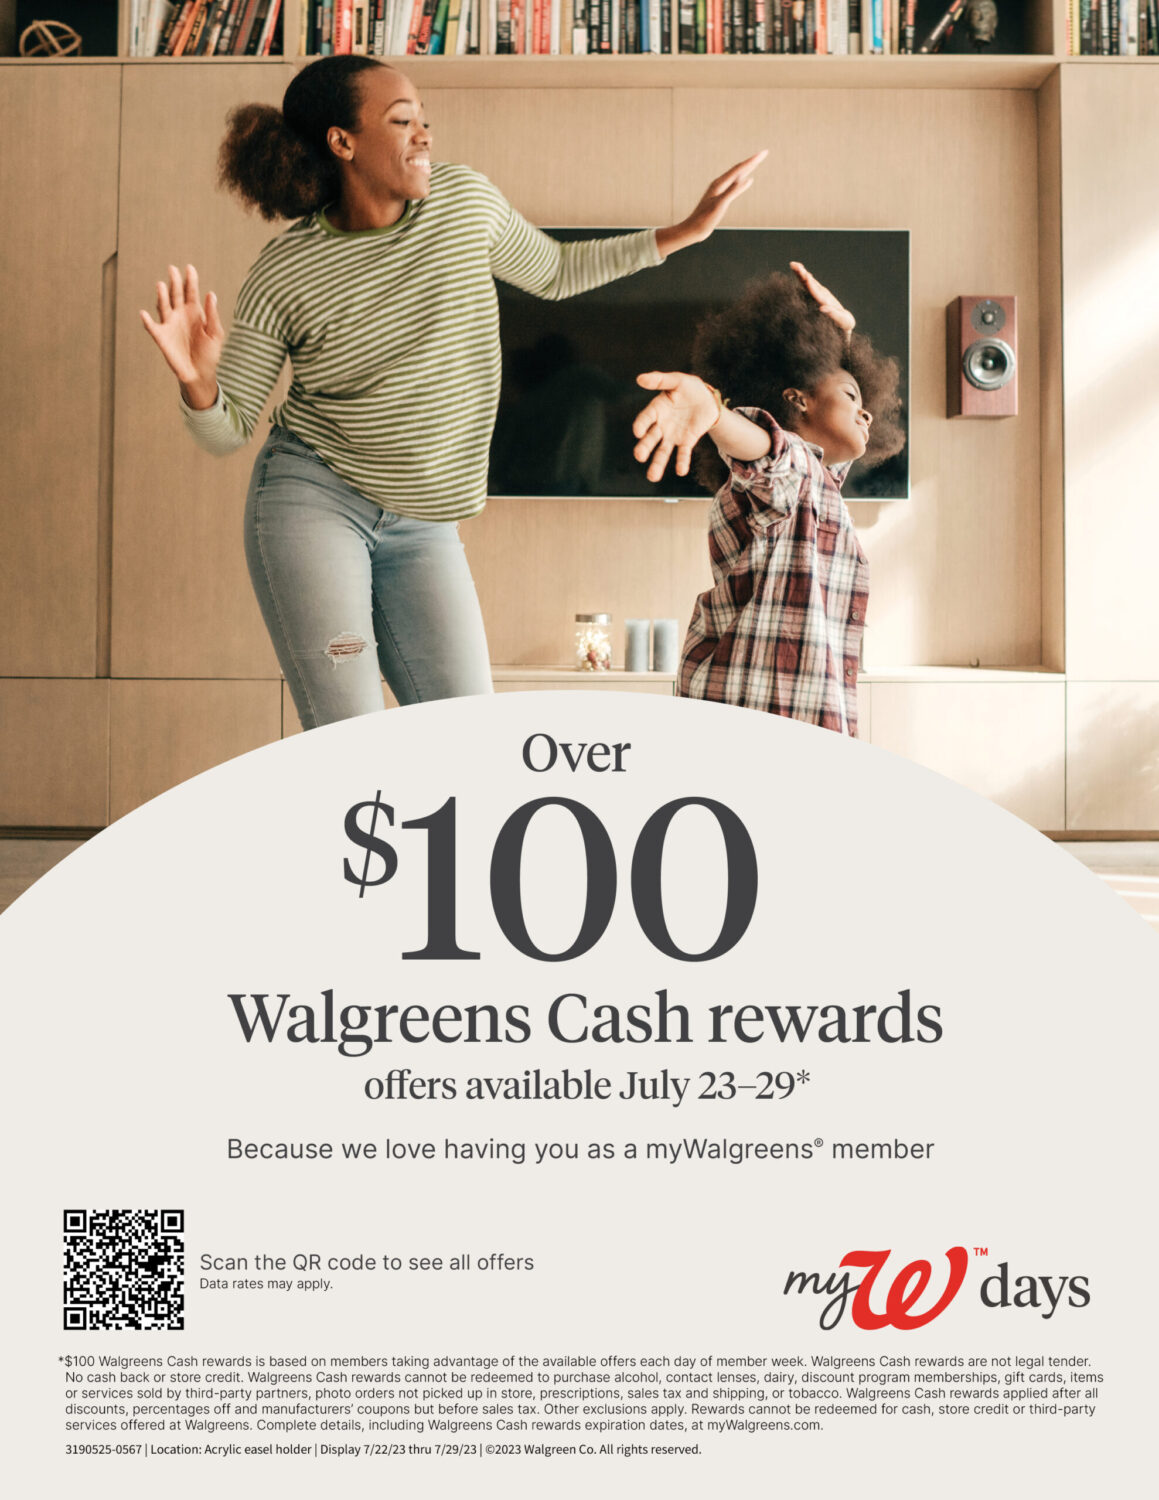 Starts Today! Walgreens' myW Days Offers Lots of FirstTime Bonuses